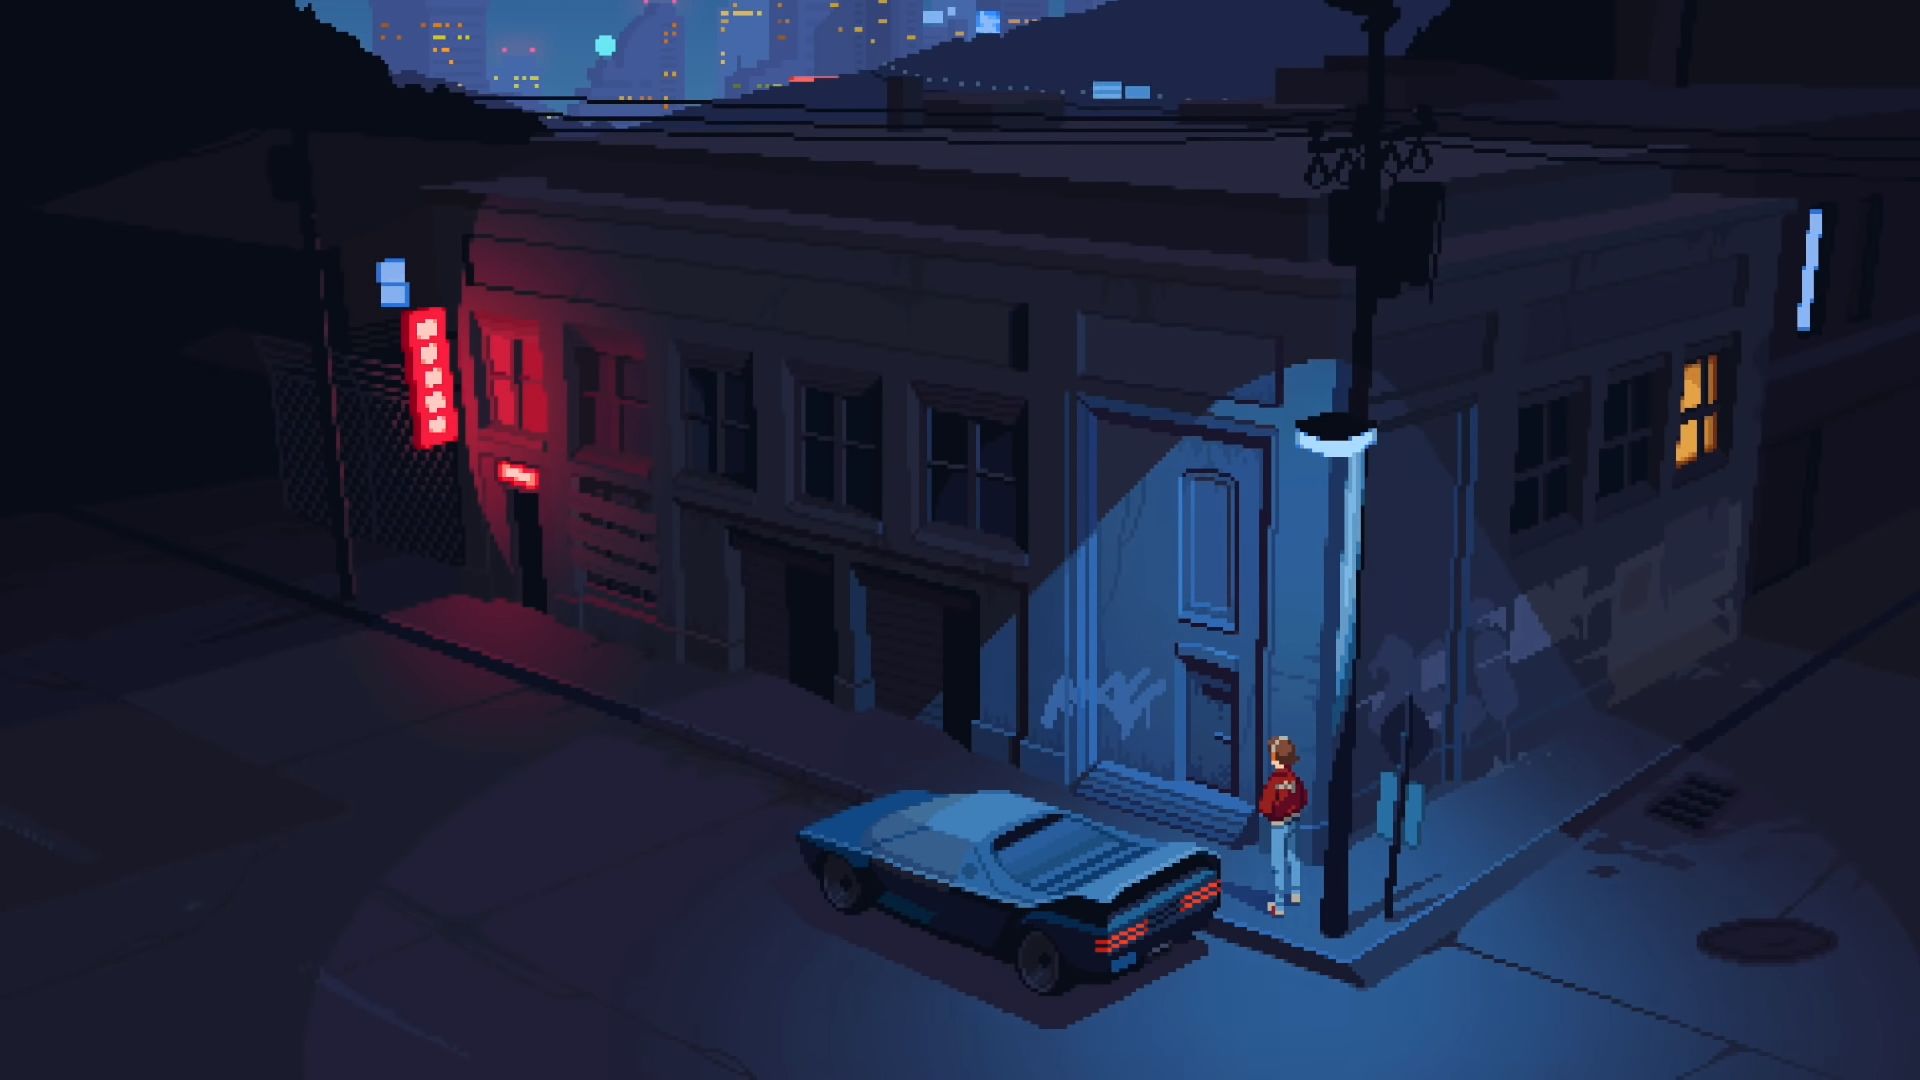 Release Date for PC and PS4 Versions of 198X Revealed